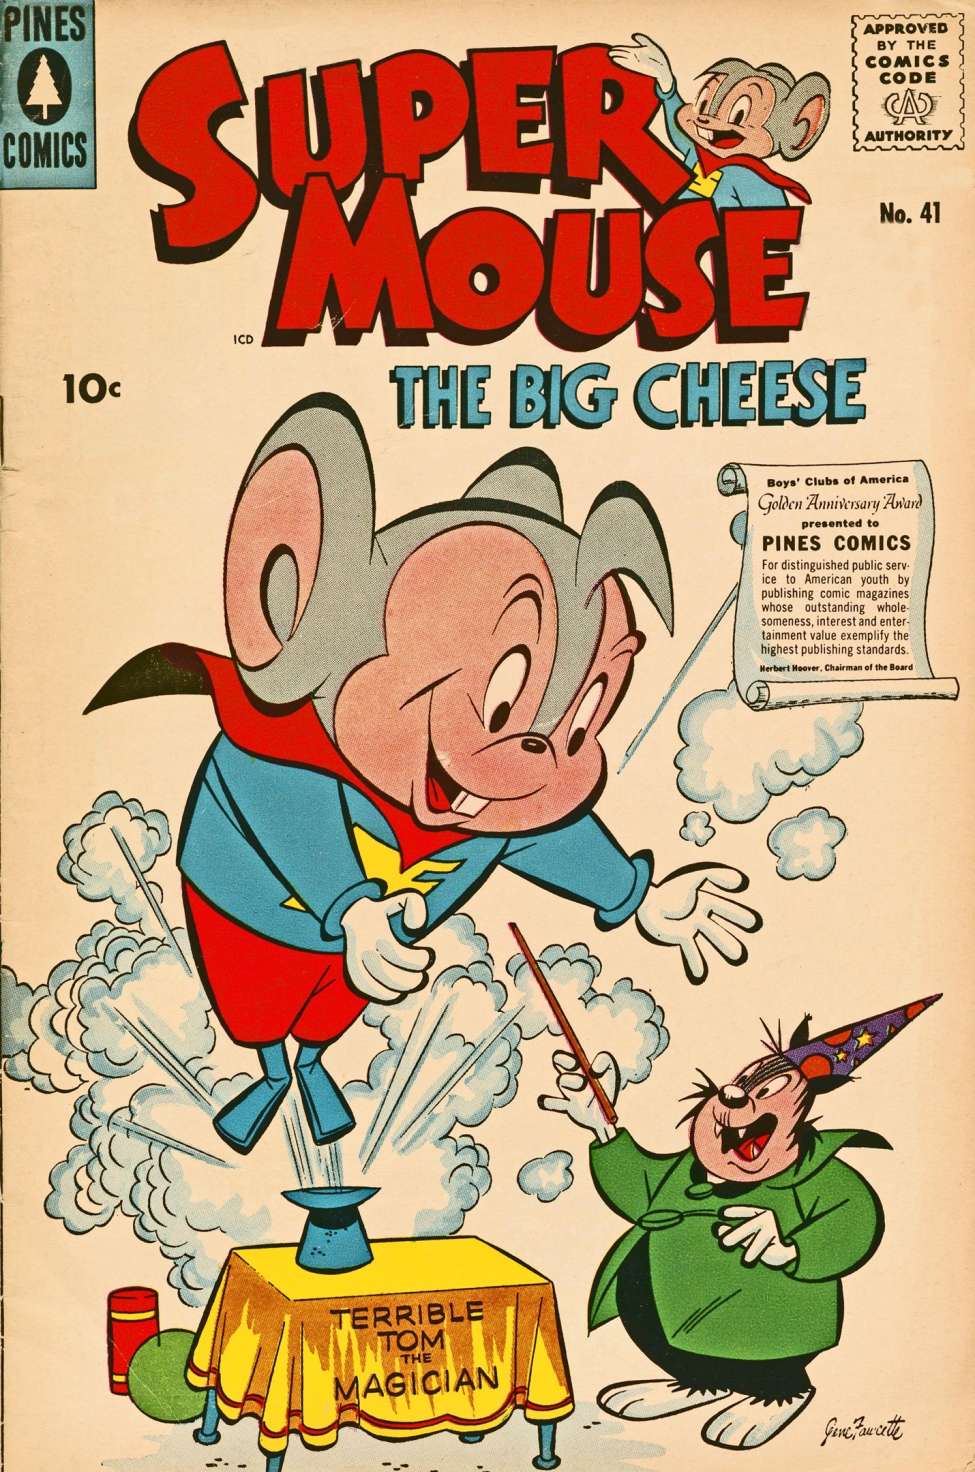 Book Cover For Supermouse 41 - Version 2